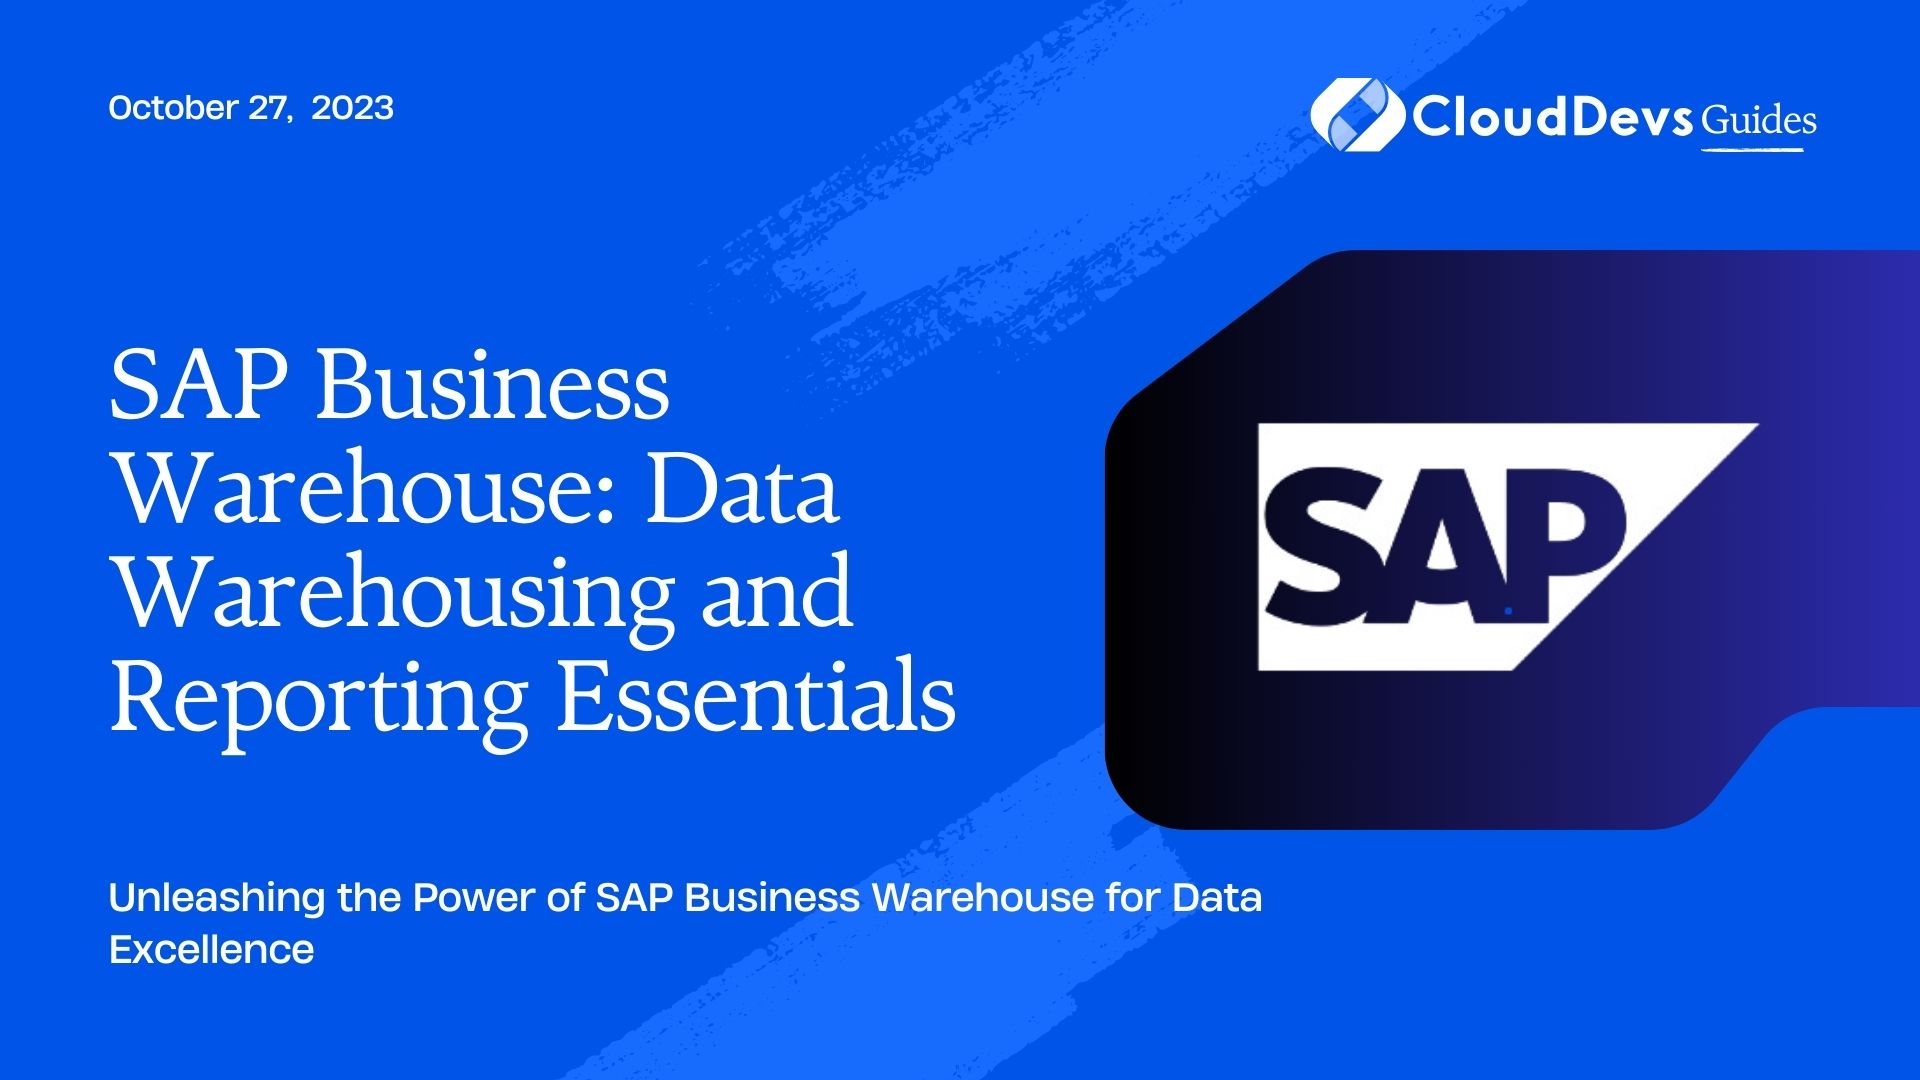 SAP Business Warehouse: Data Warehousing and Reporting Essentials